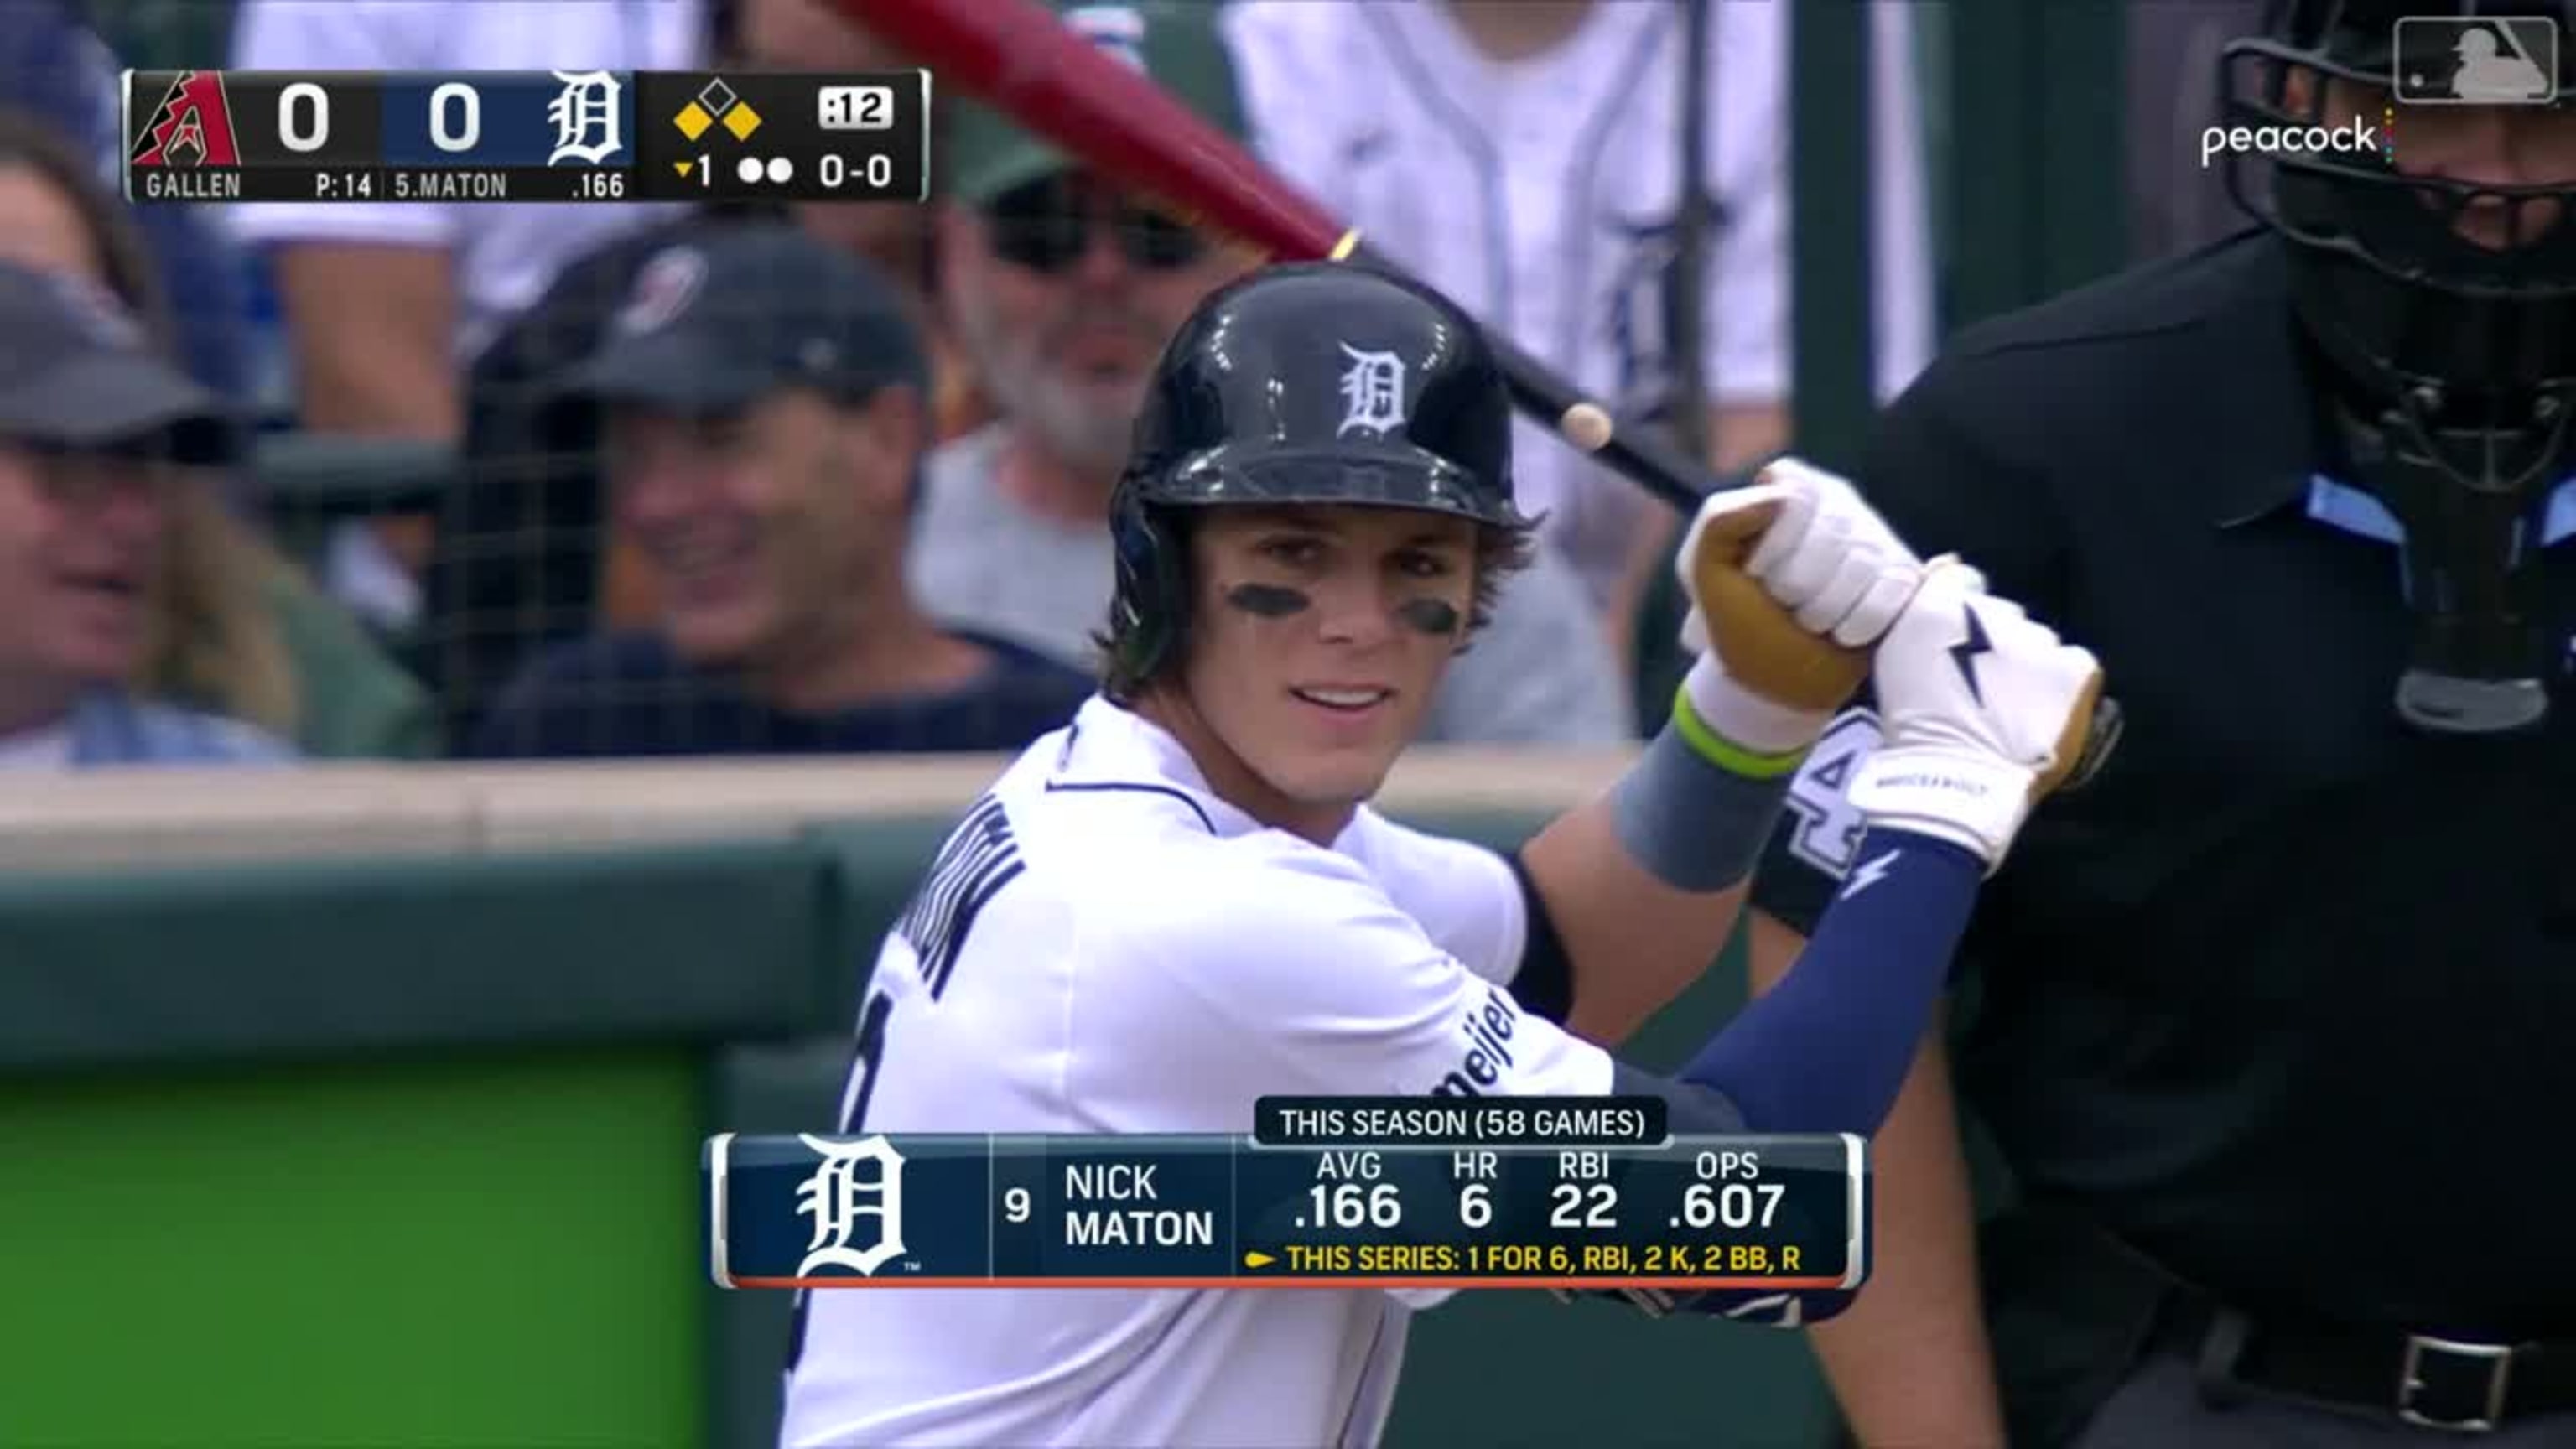 Detroit Tigers' Zach McKinstry crushing ball, thanks to 2 All-Stars